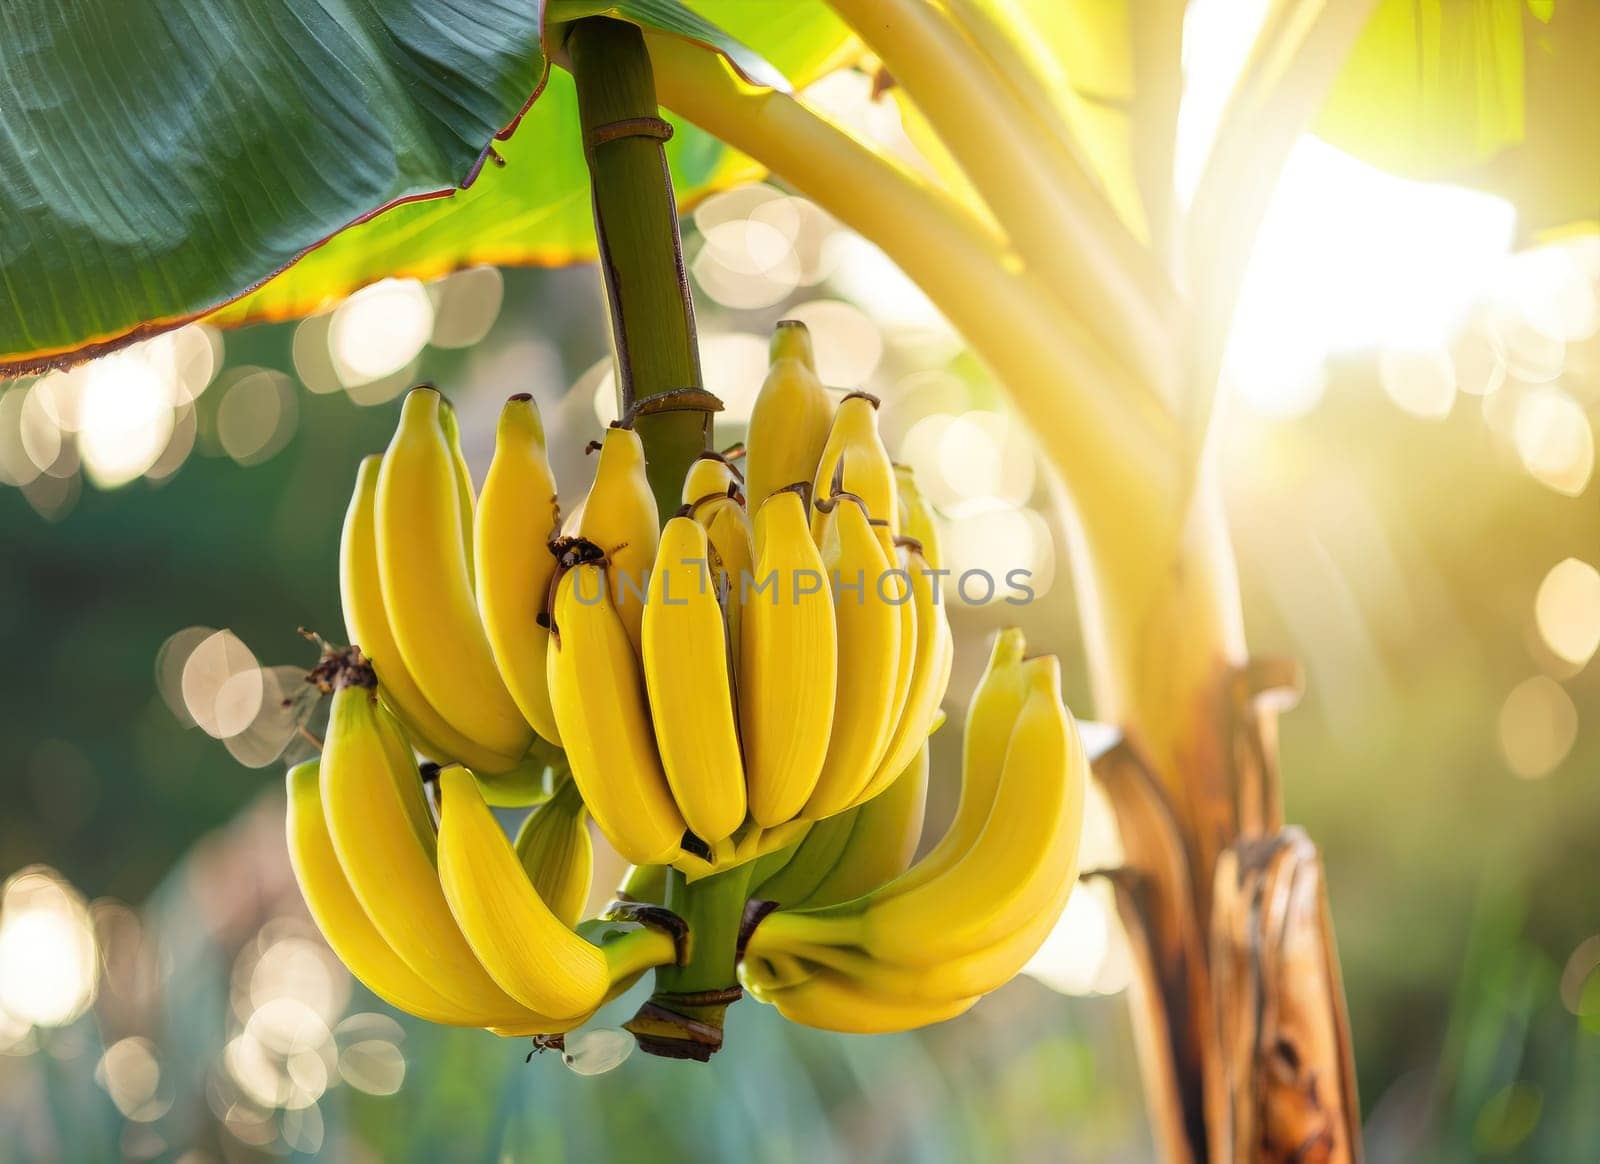 Yellow Banana grows on a tree in the harvest garden on everning sun flare.